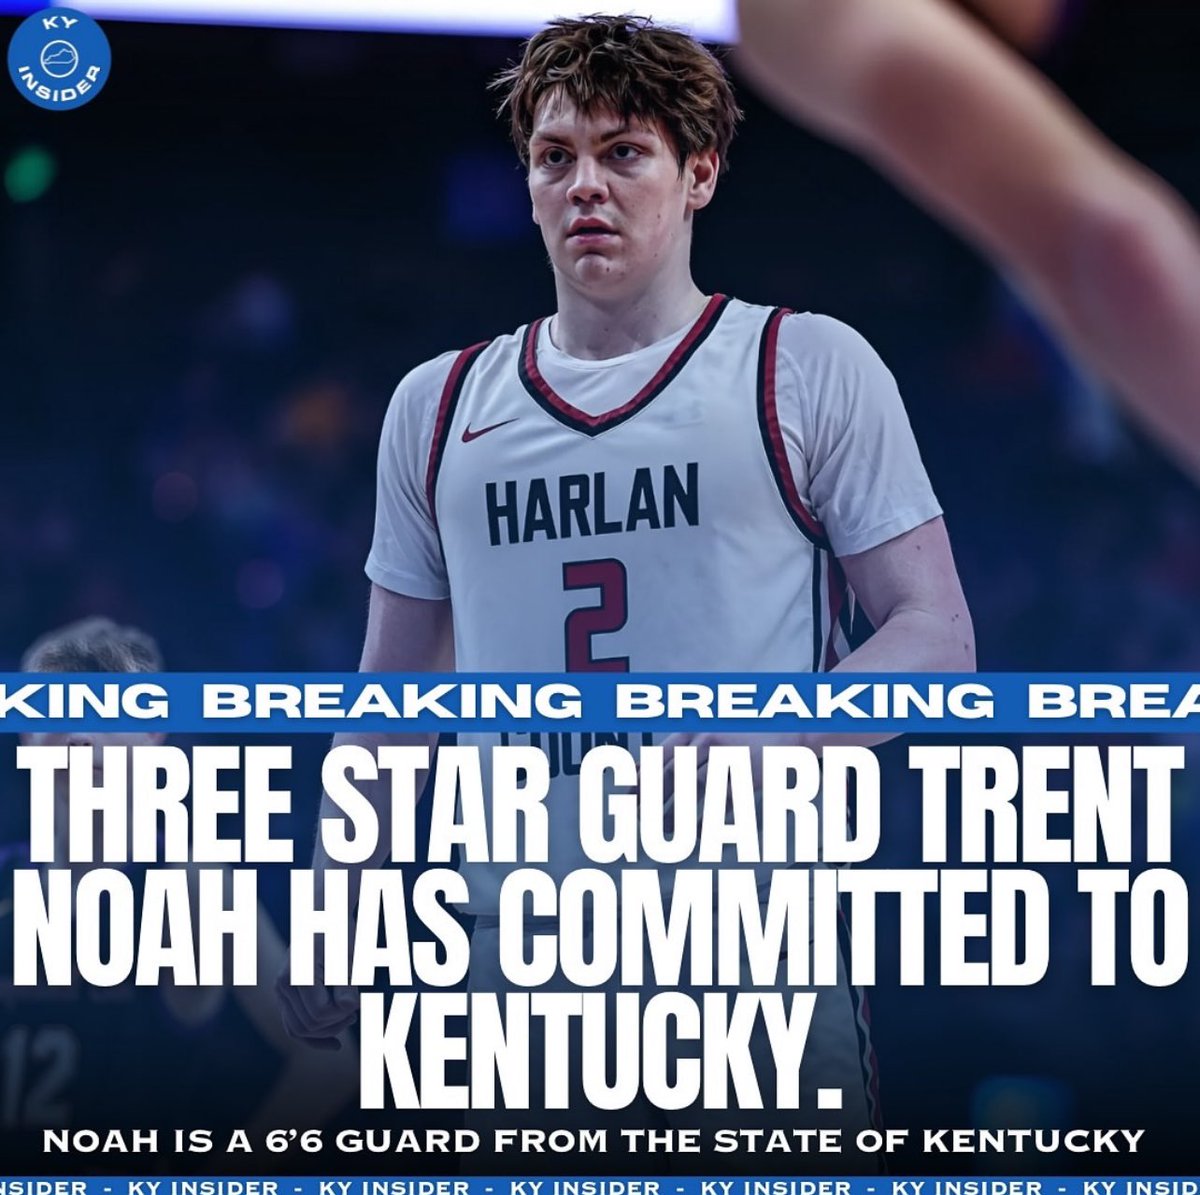 Trent Noah is a Kentucky Wildcat!

Mark Pope talked about getting Kentucky’s best talent when he was first hired:

“These young men that grow up in Kentucky, they bring a spirit to the team that cannot be fabricated or replaced. And it helps us to win, and we will continue to…